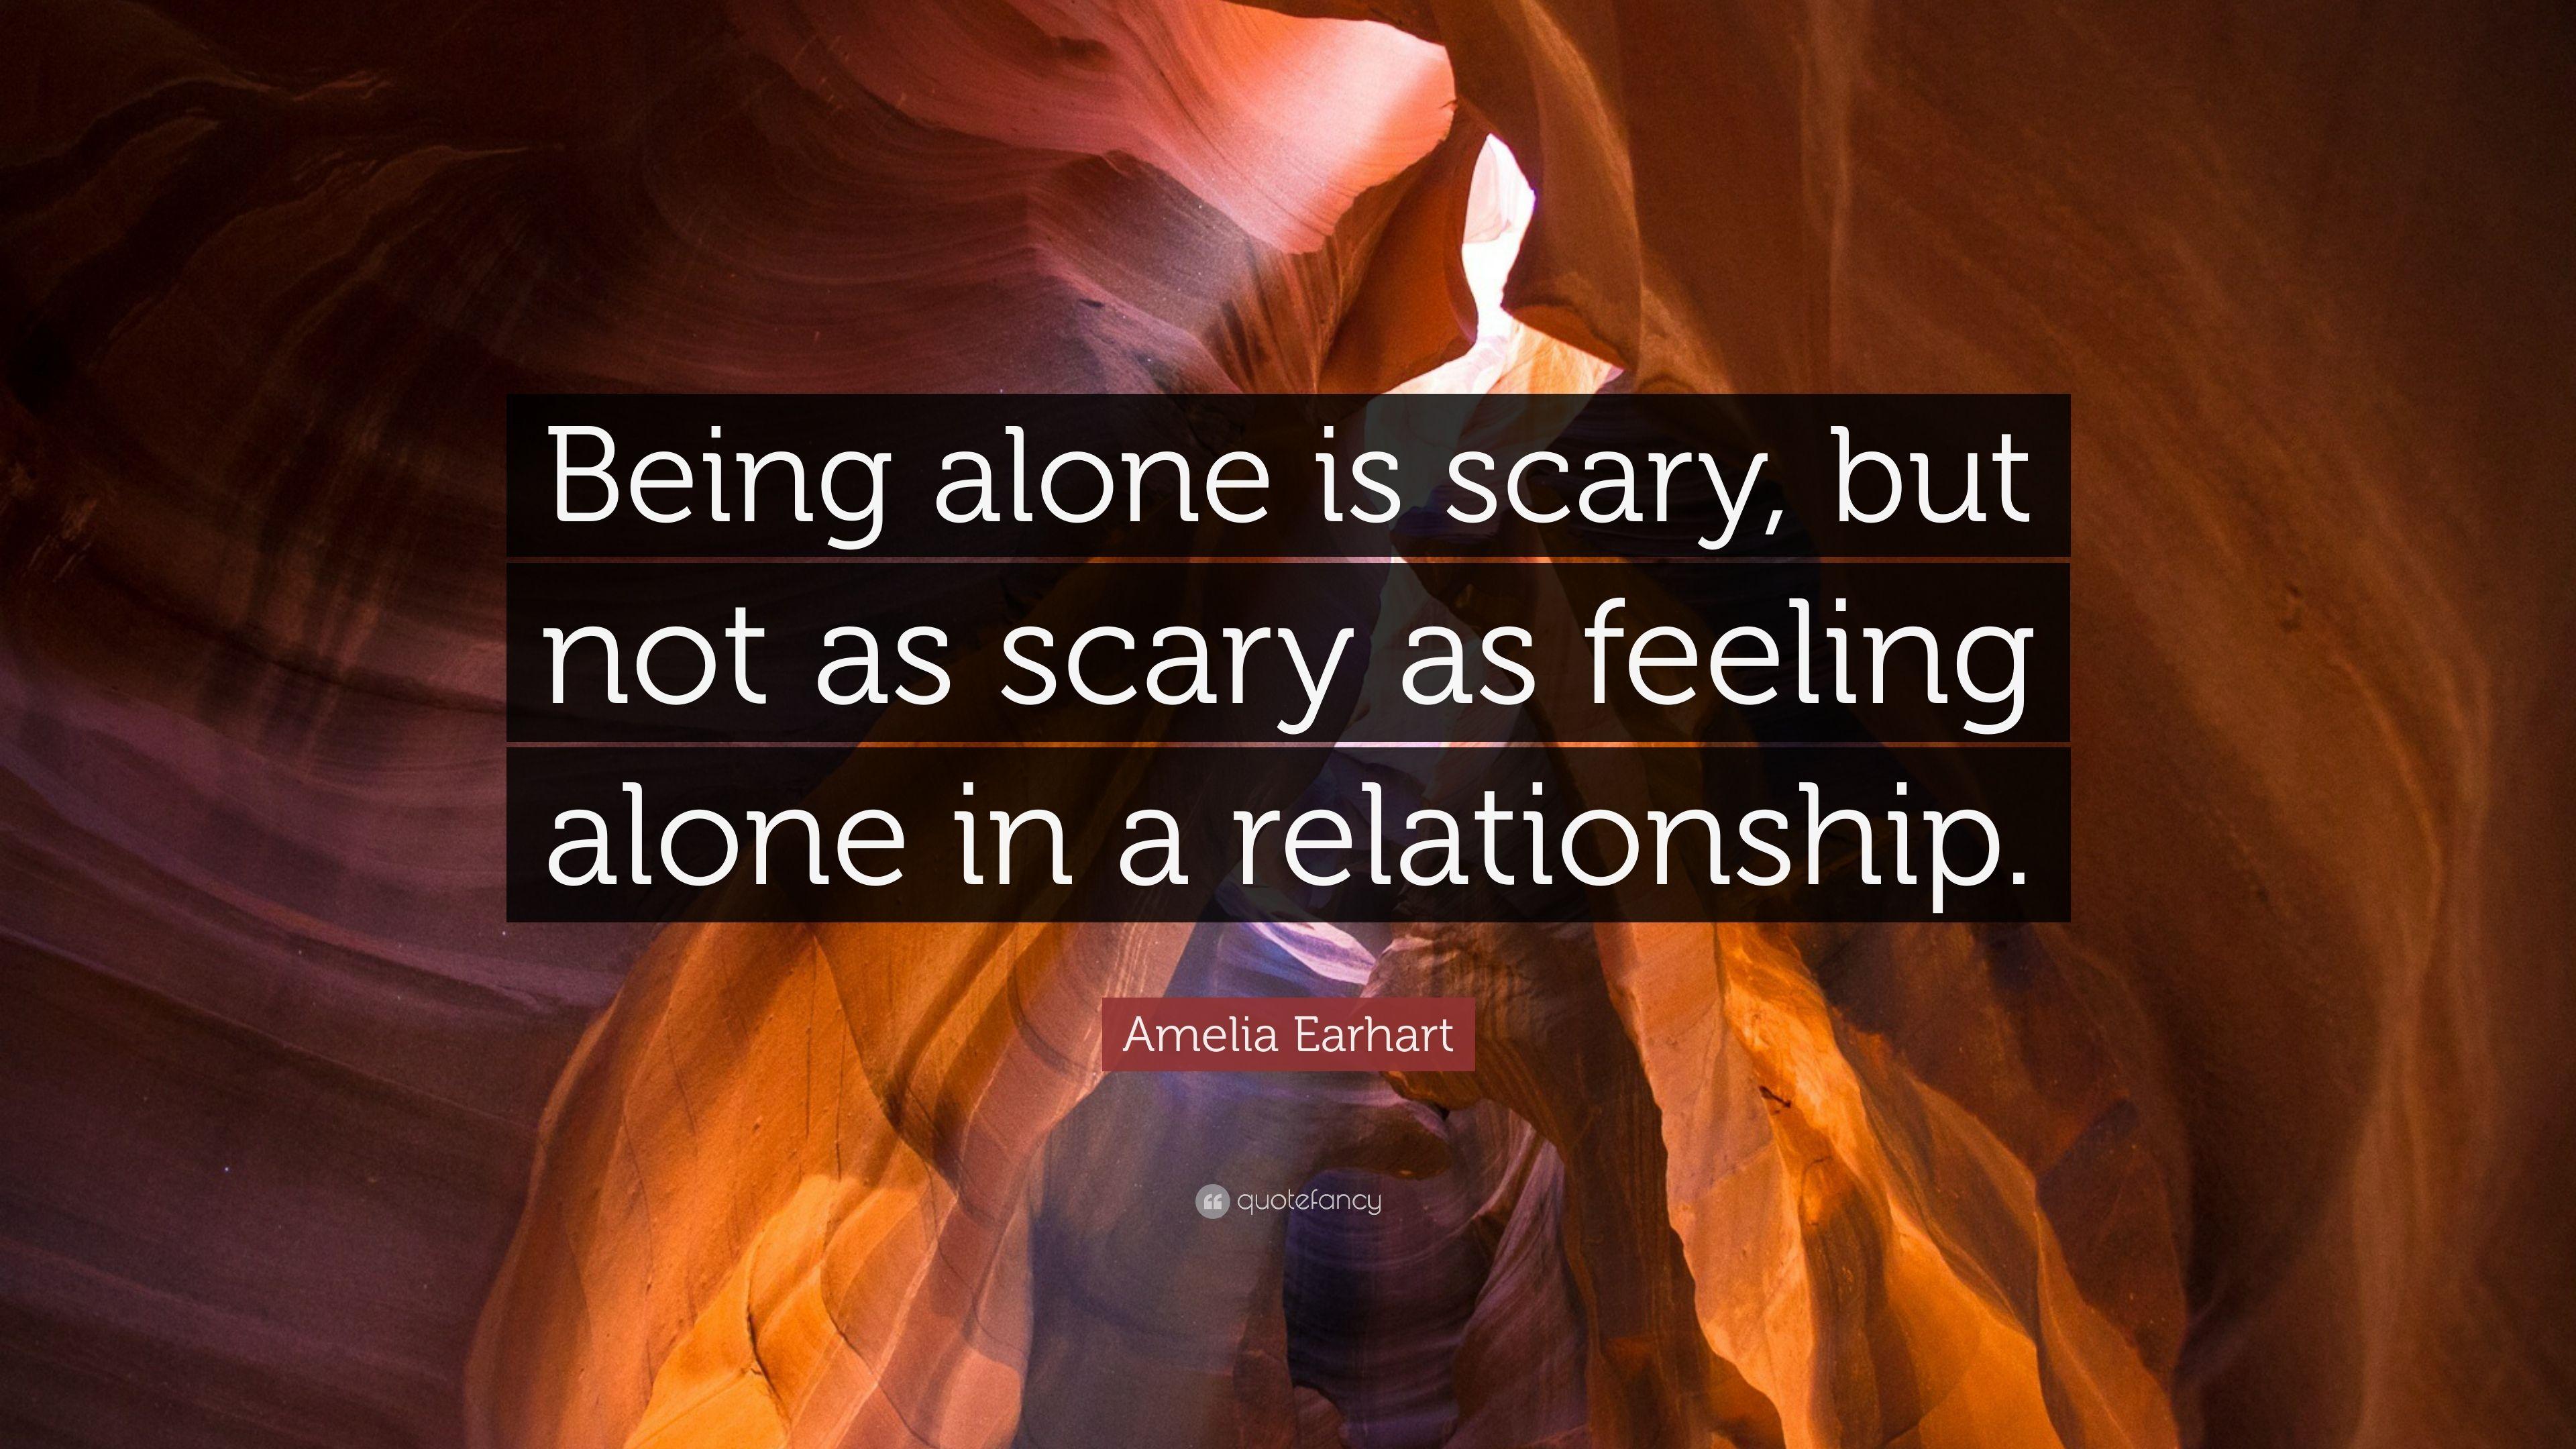 Amelia Earhart Quote: “Being alone is scary, but not as scary as